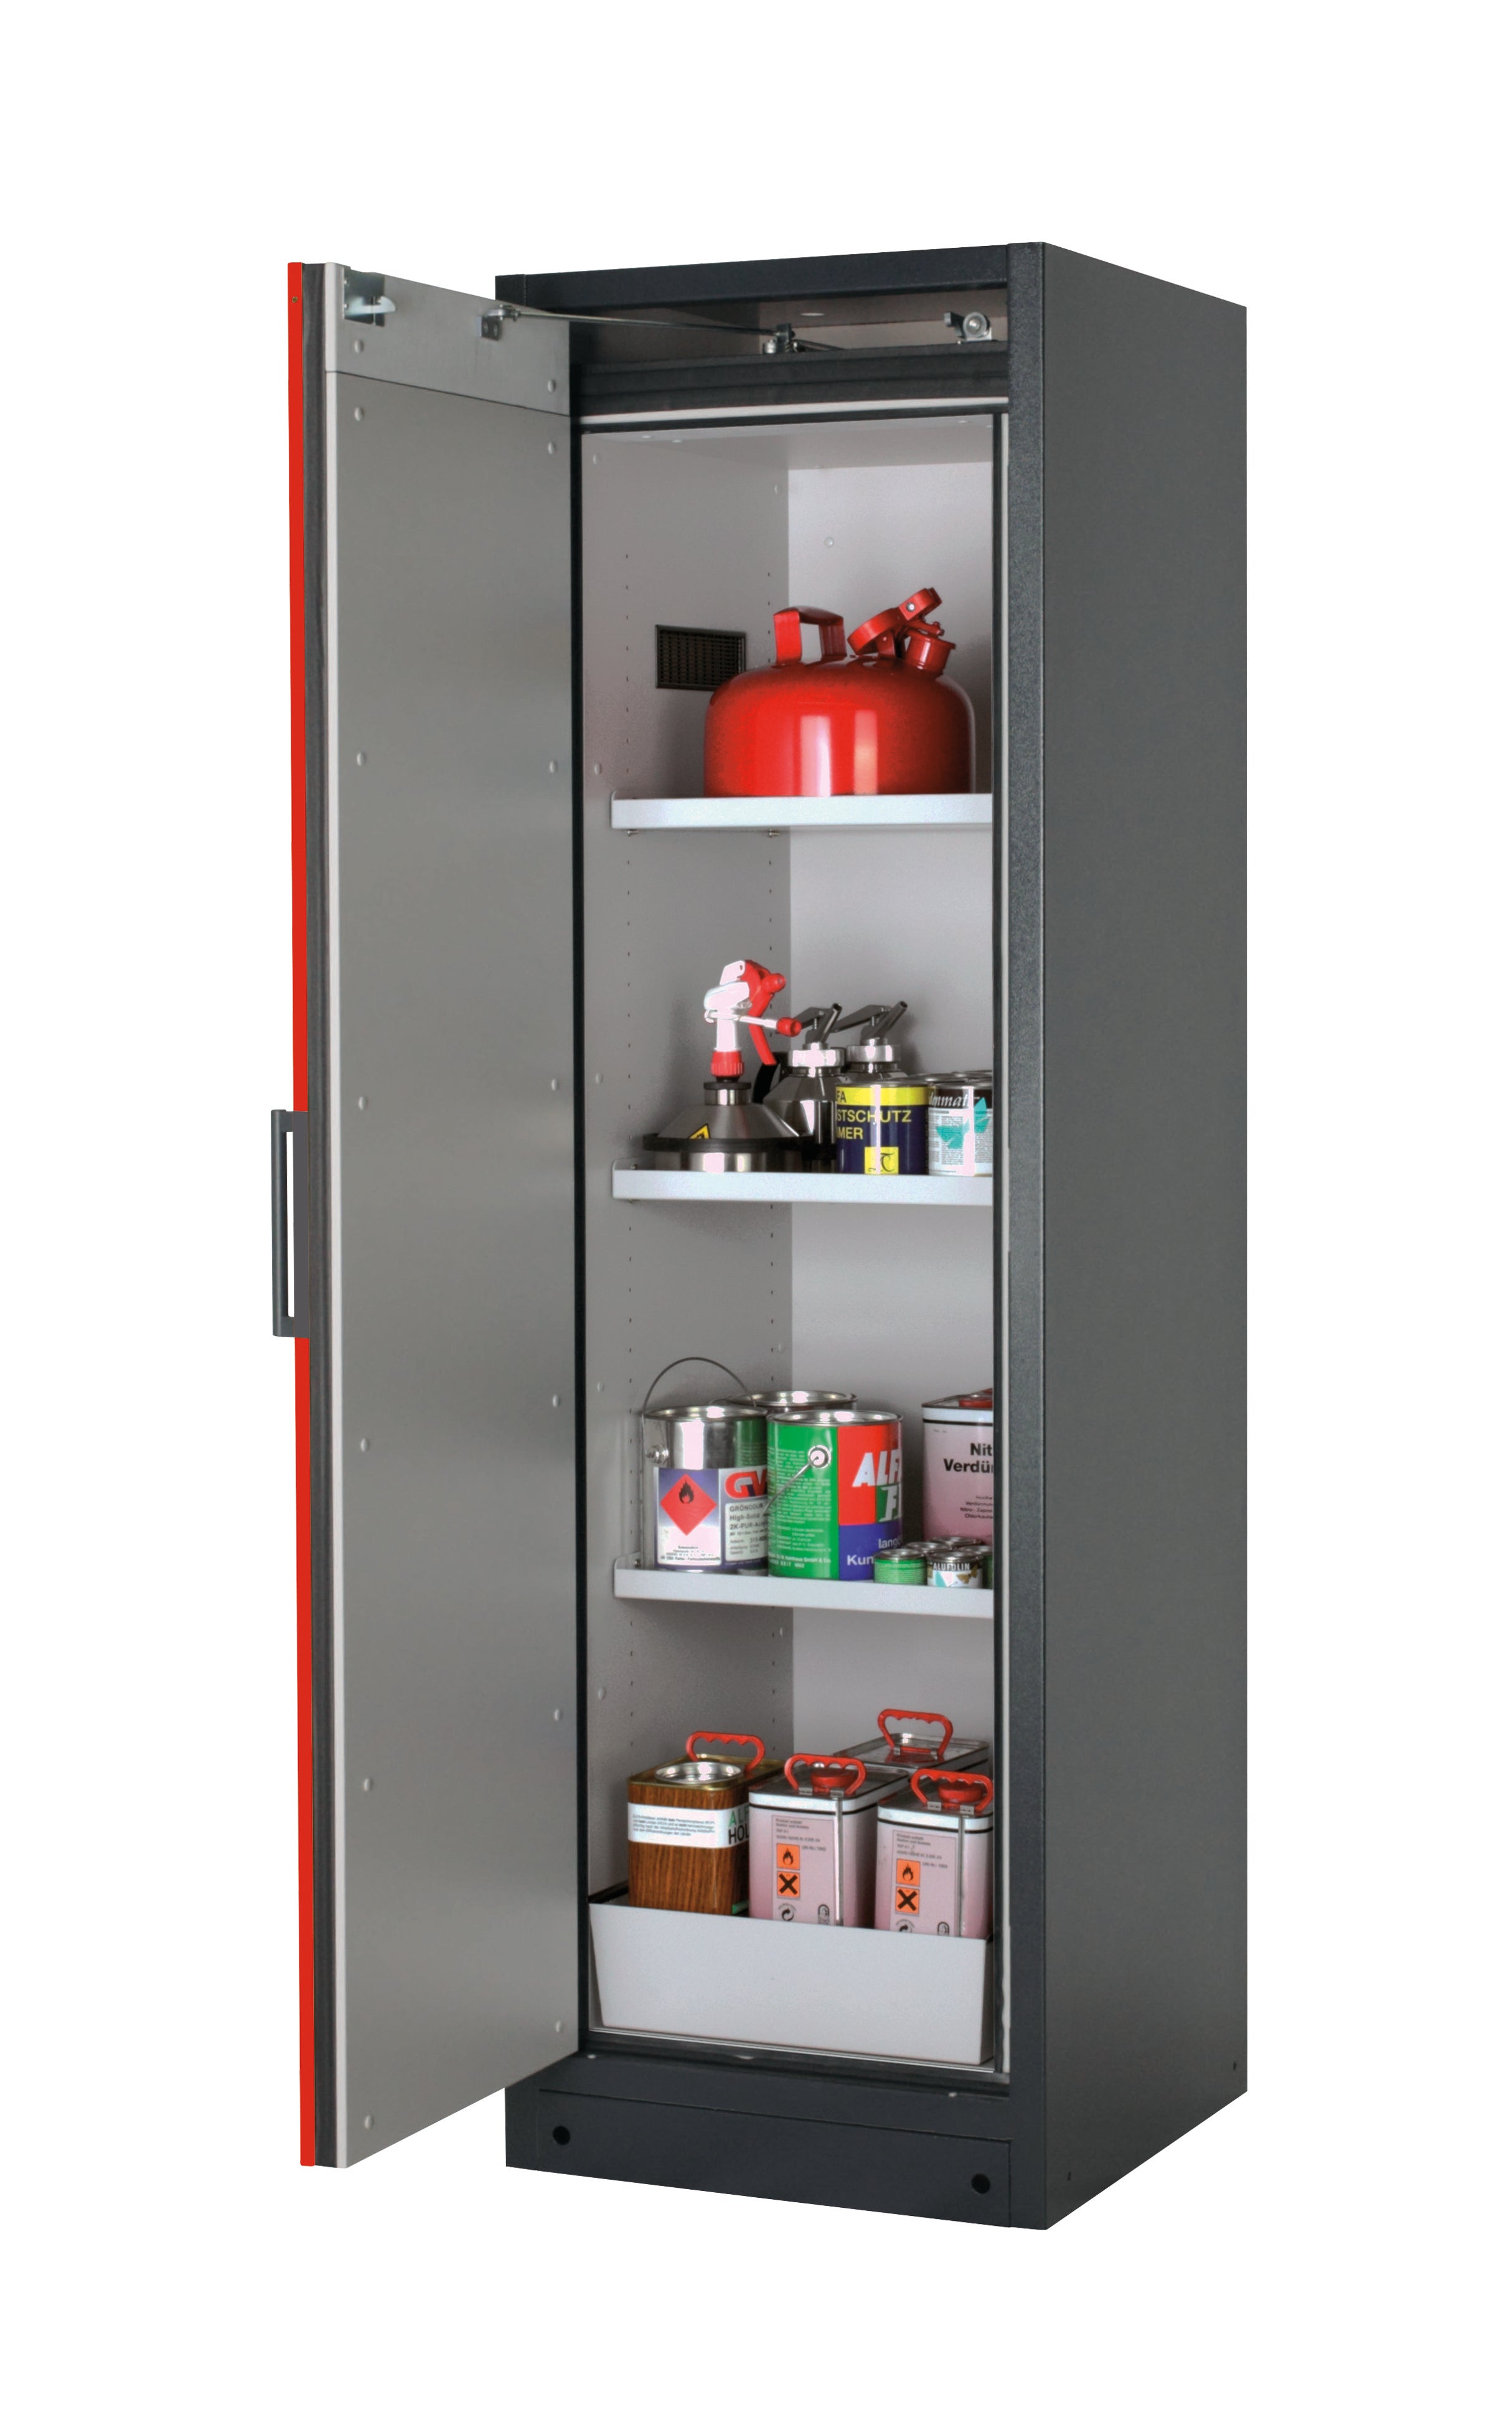 Type 90 safety storage cabinet Q-CLASSIC-90 model Q90.195.060 in traffic red RAL 3020 with 3x shelf standard (sheet steel),